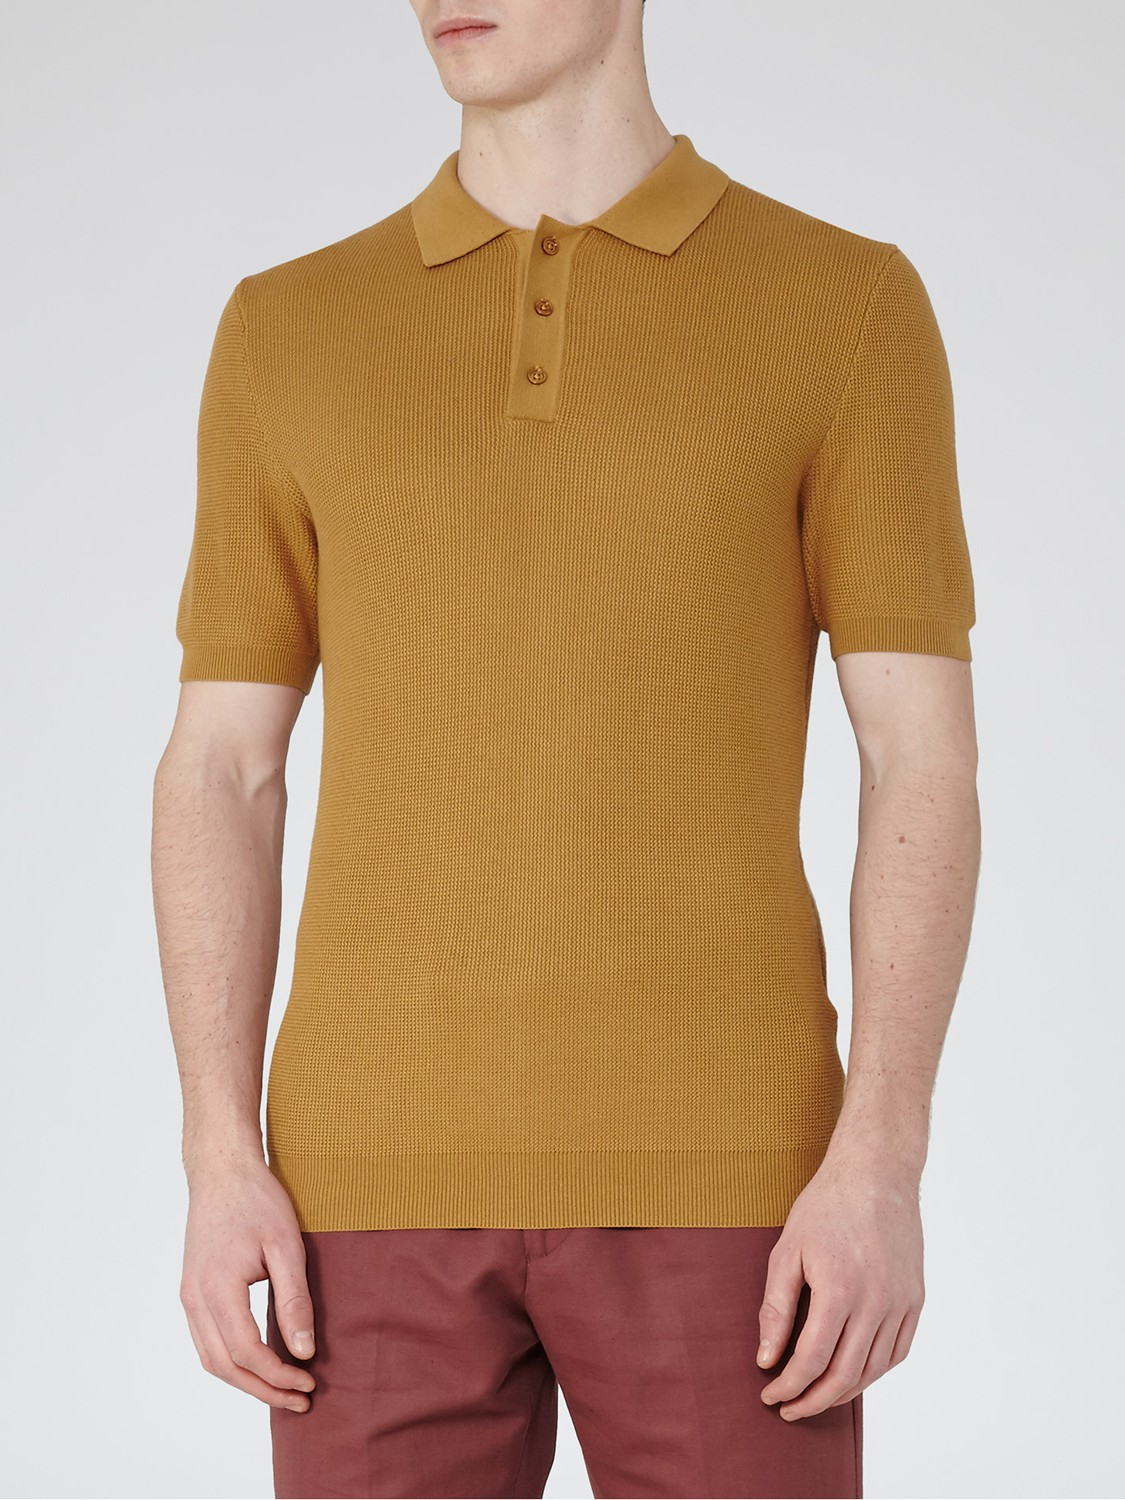 Reiss Cotton Hamish Text Polo Shirt in Mustard Yellow 